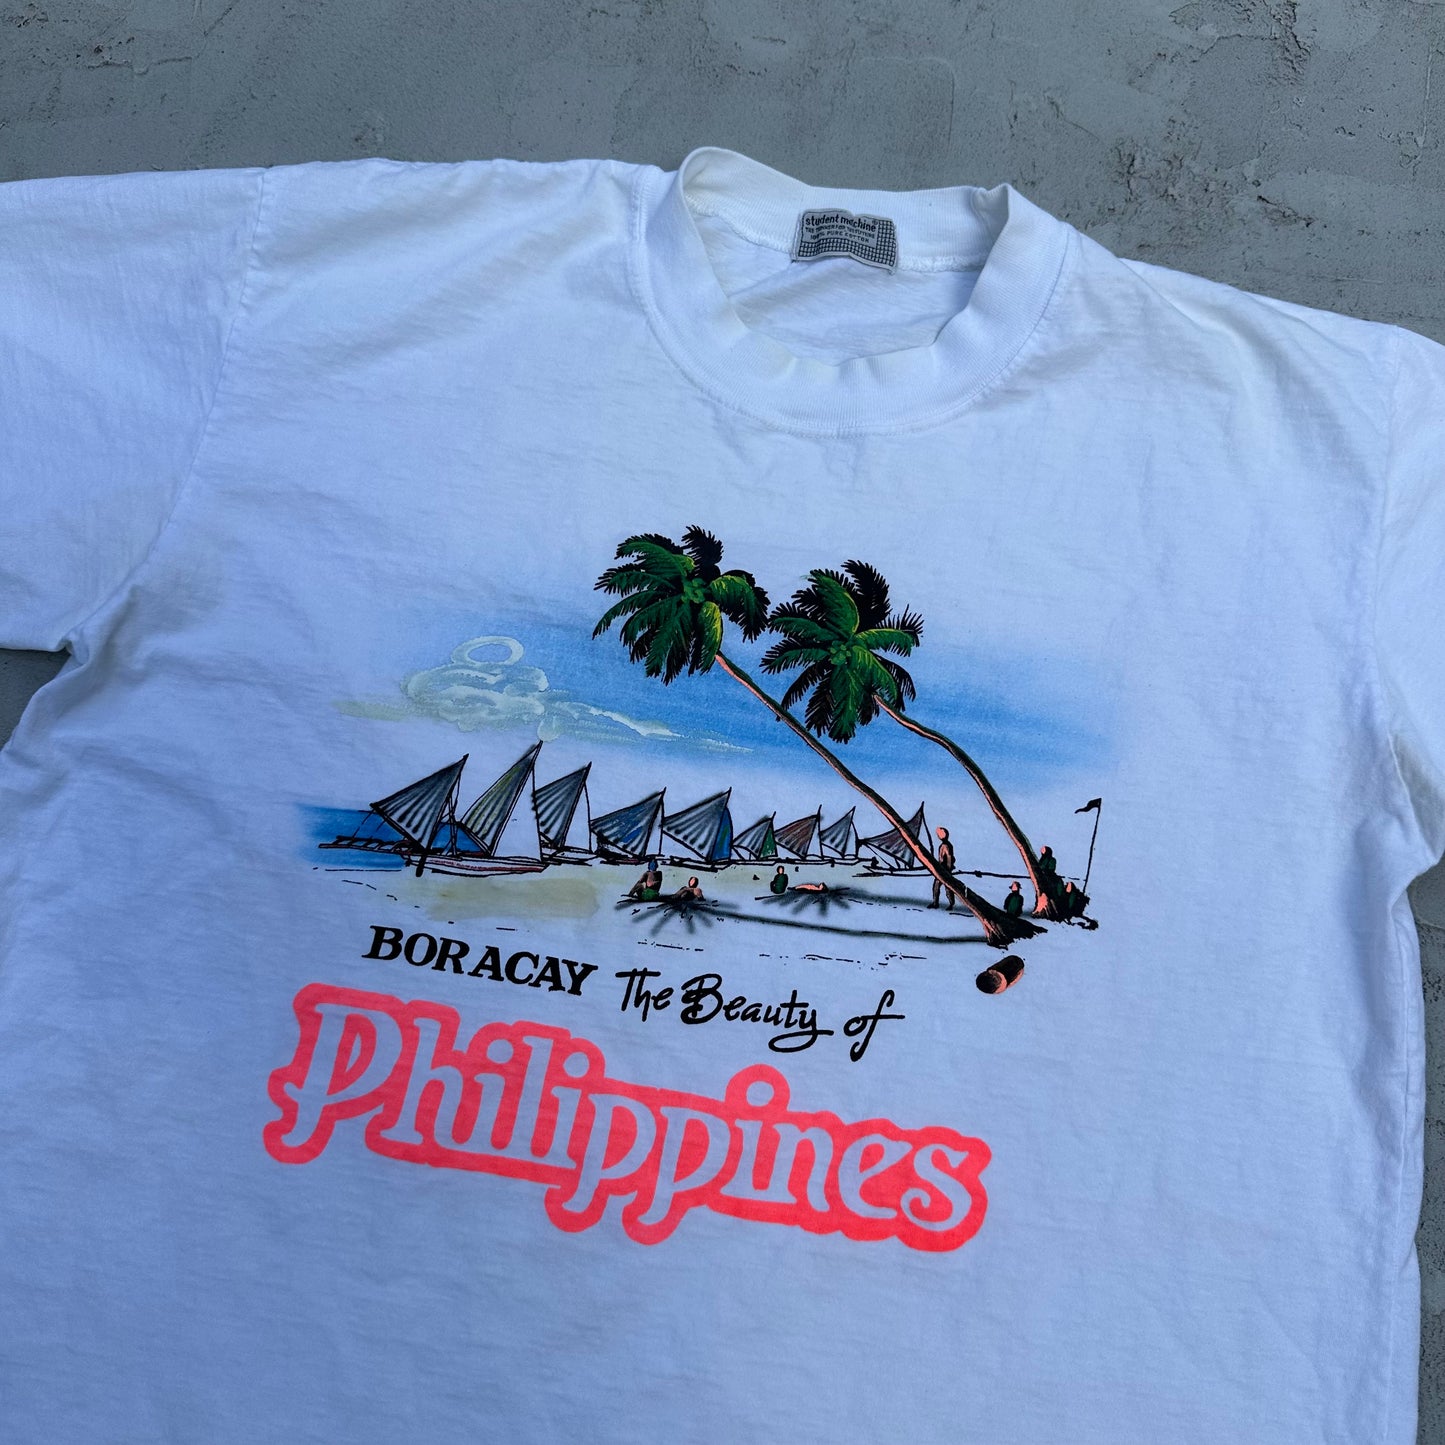 Vintage Boracay Philippines Hand-Painted T Shirt - L